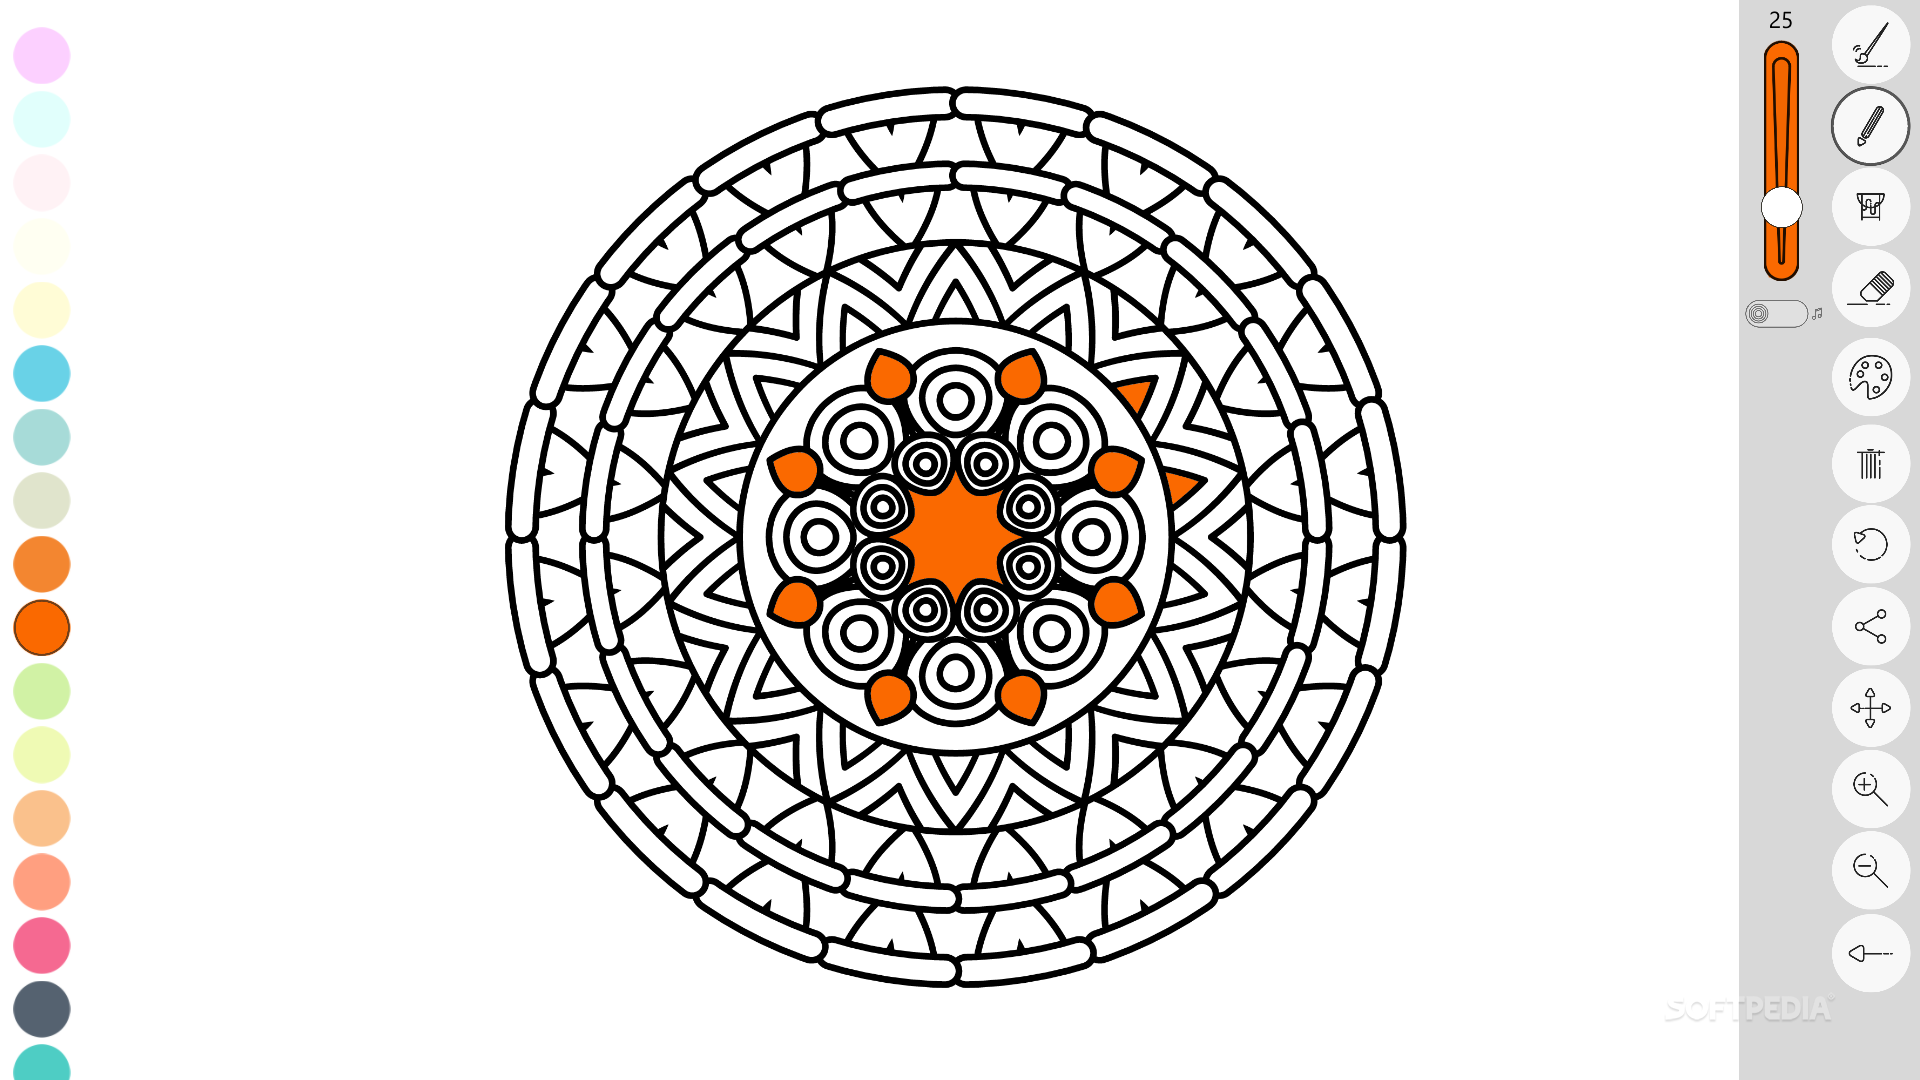 Zen: Coloring book for adults Download: Relax and find your peace by